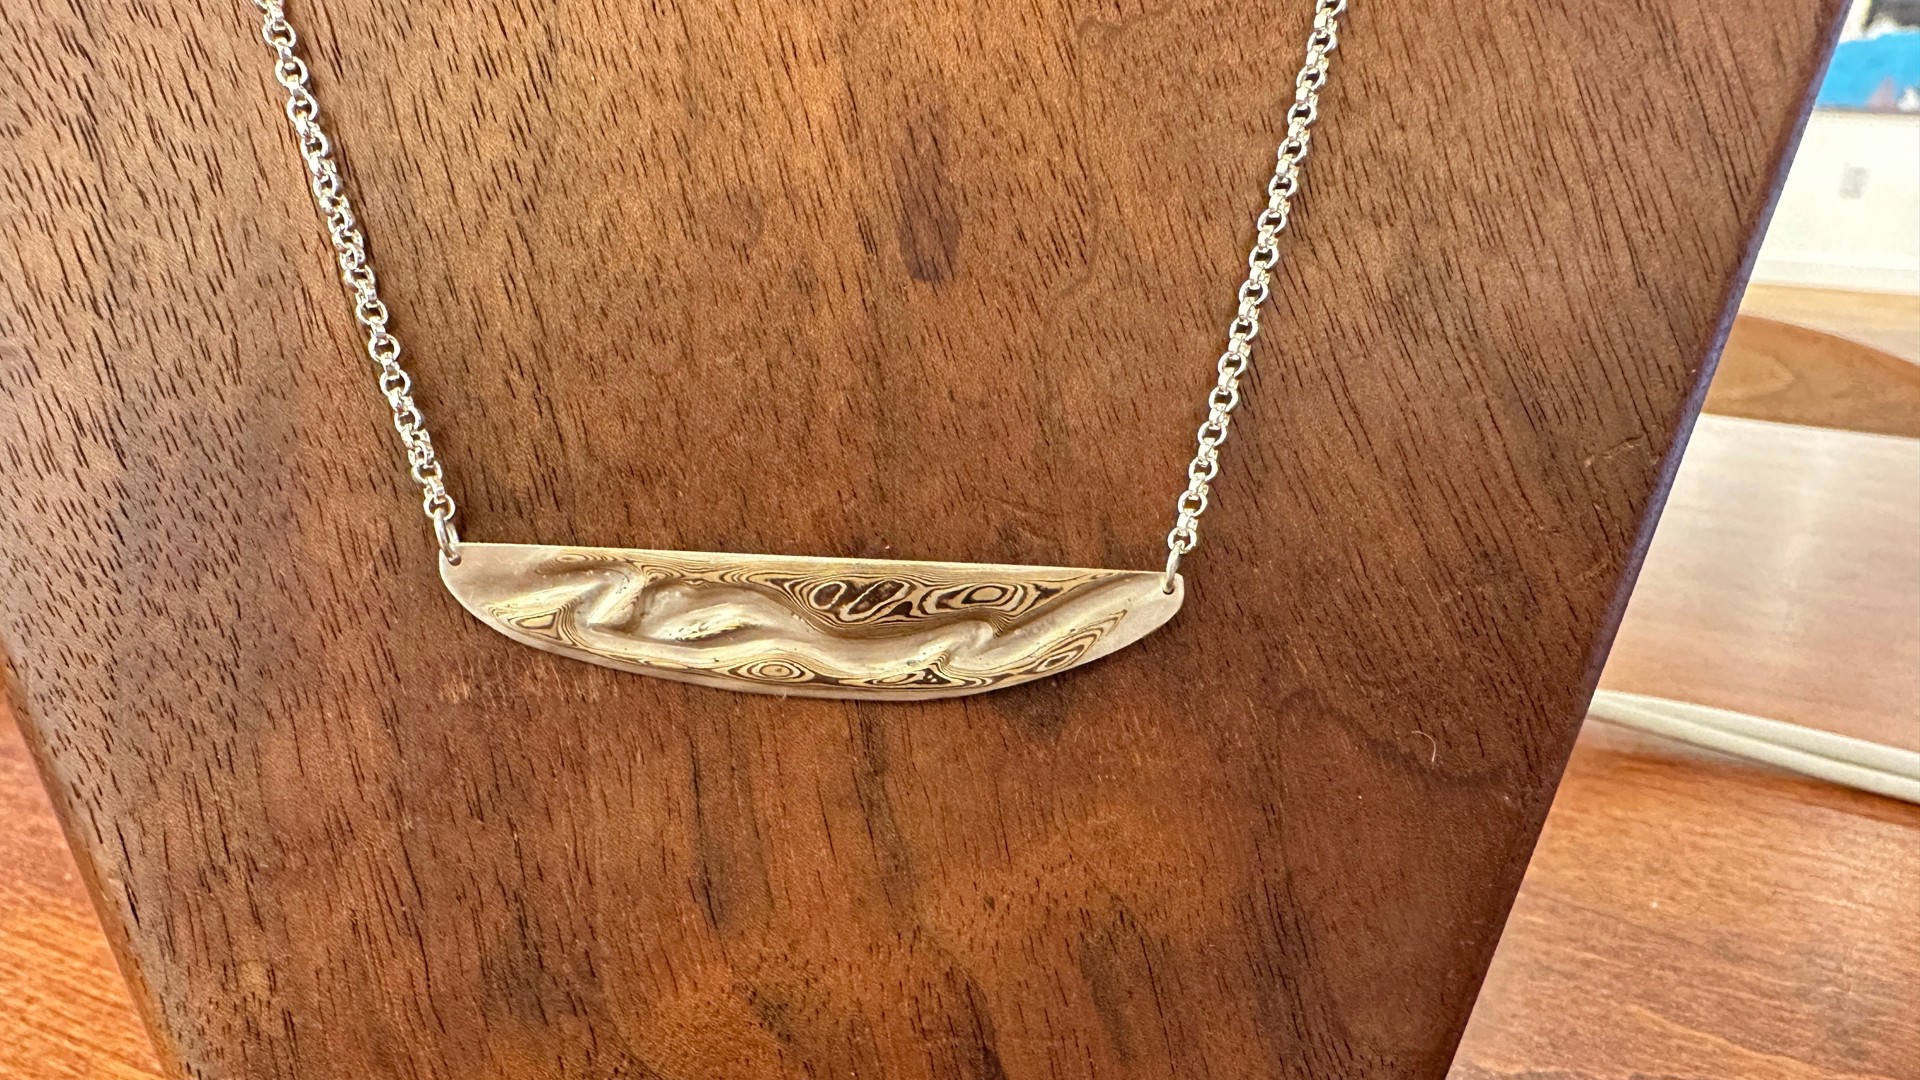 Carved River necklace by Christopher Taylor Timberlake